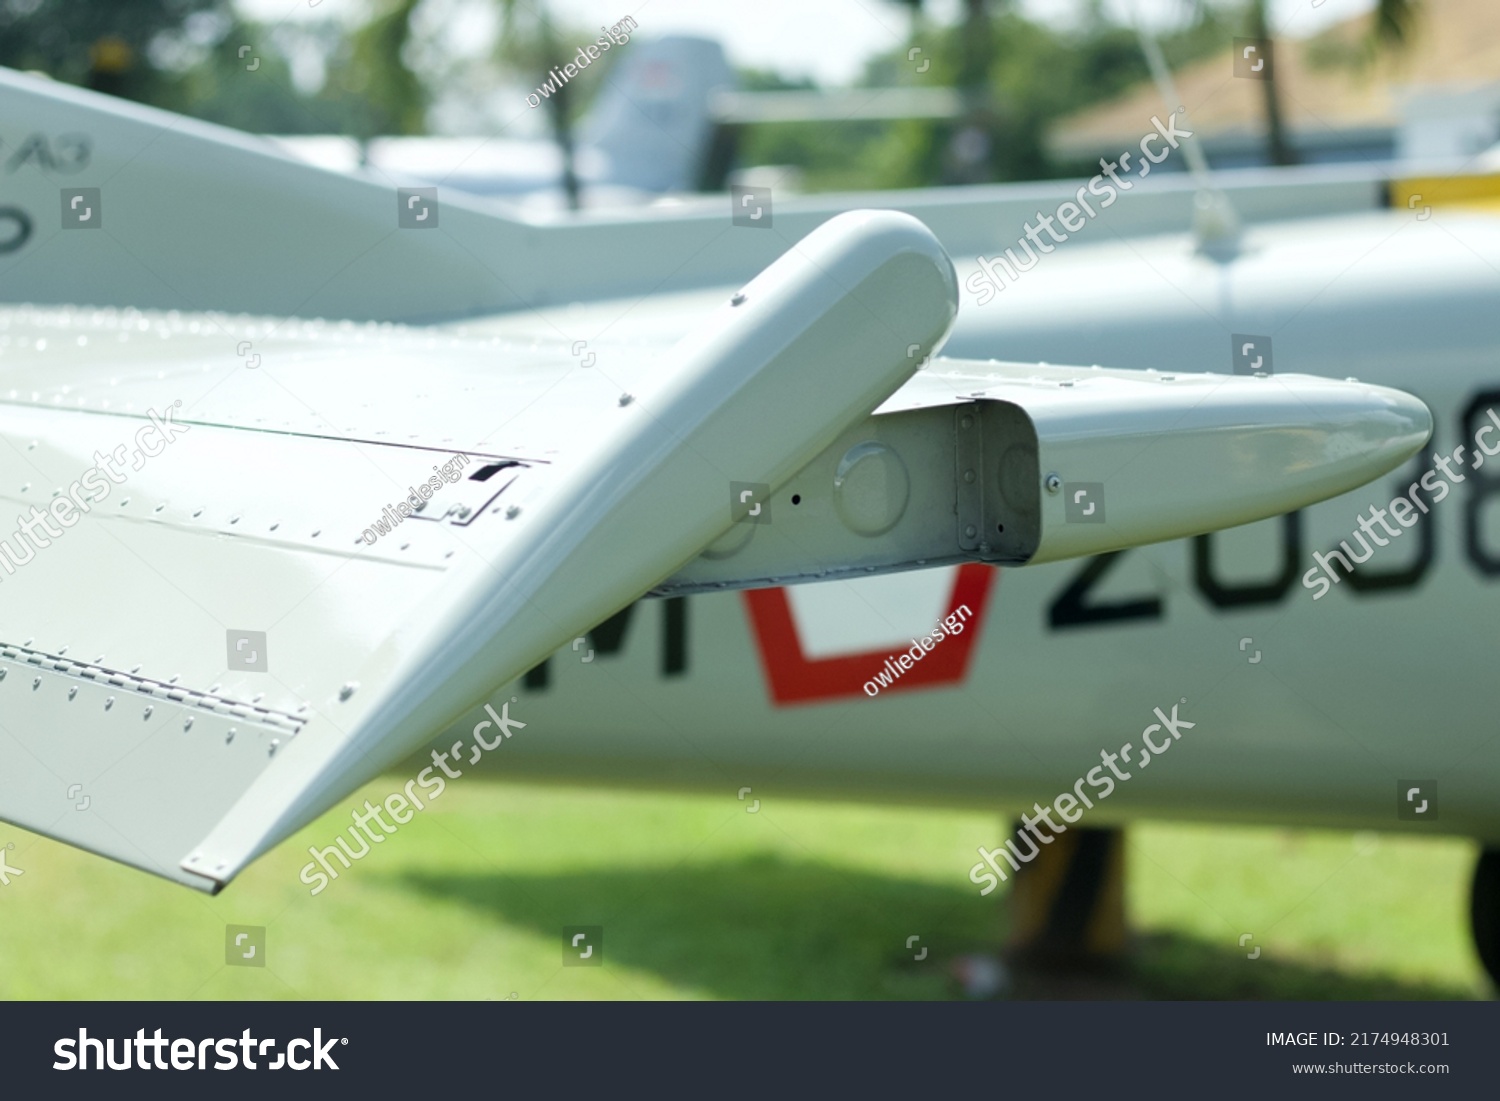 Close up image of an airfoil of an old aircraft #2174948301